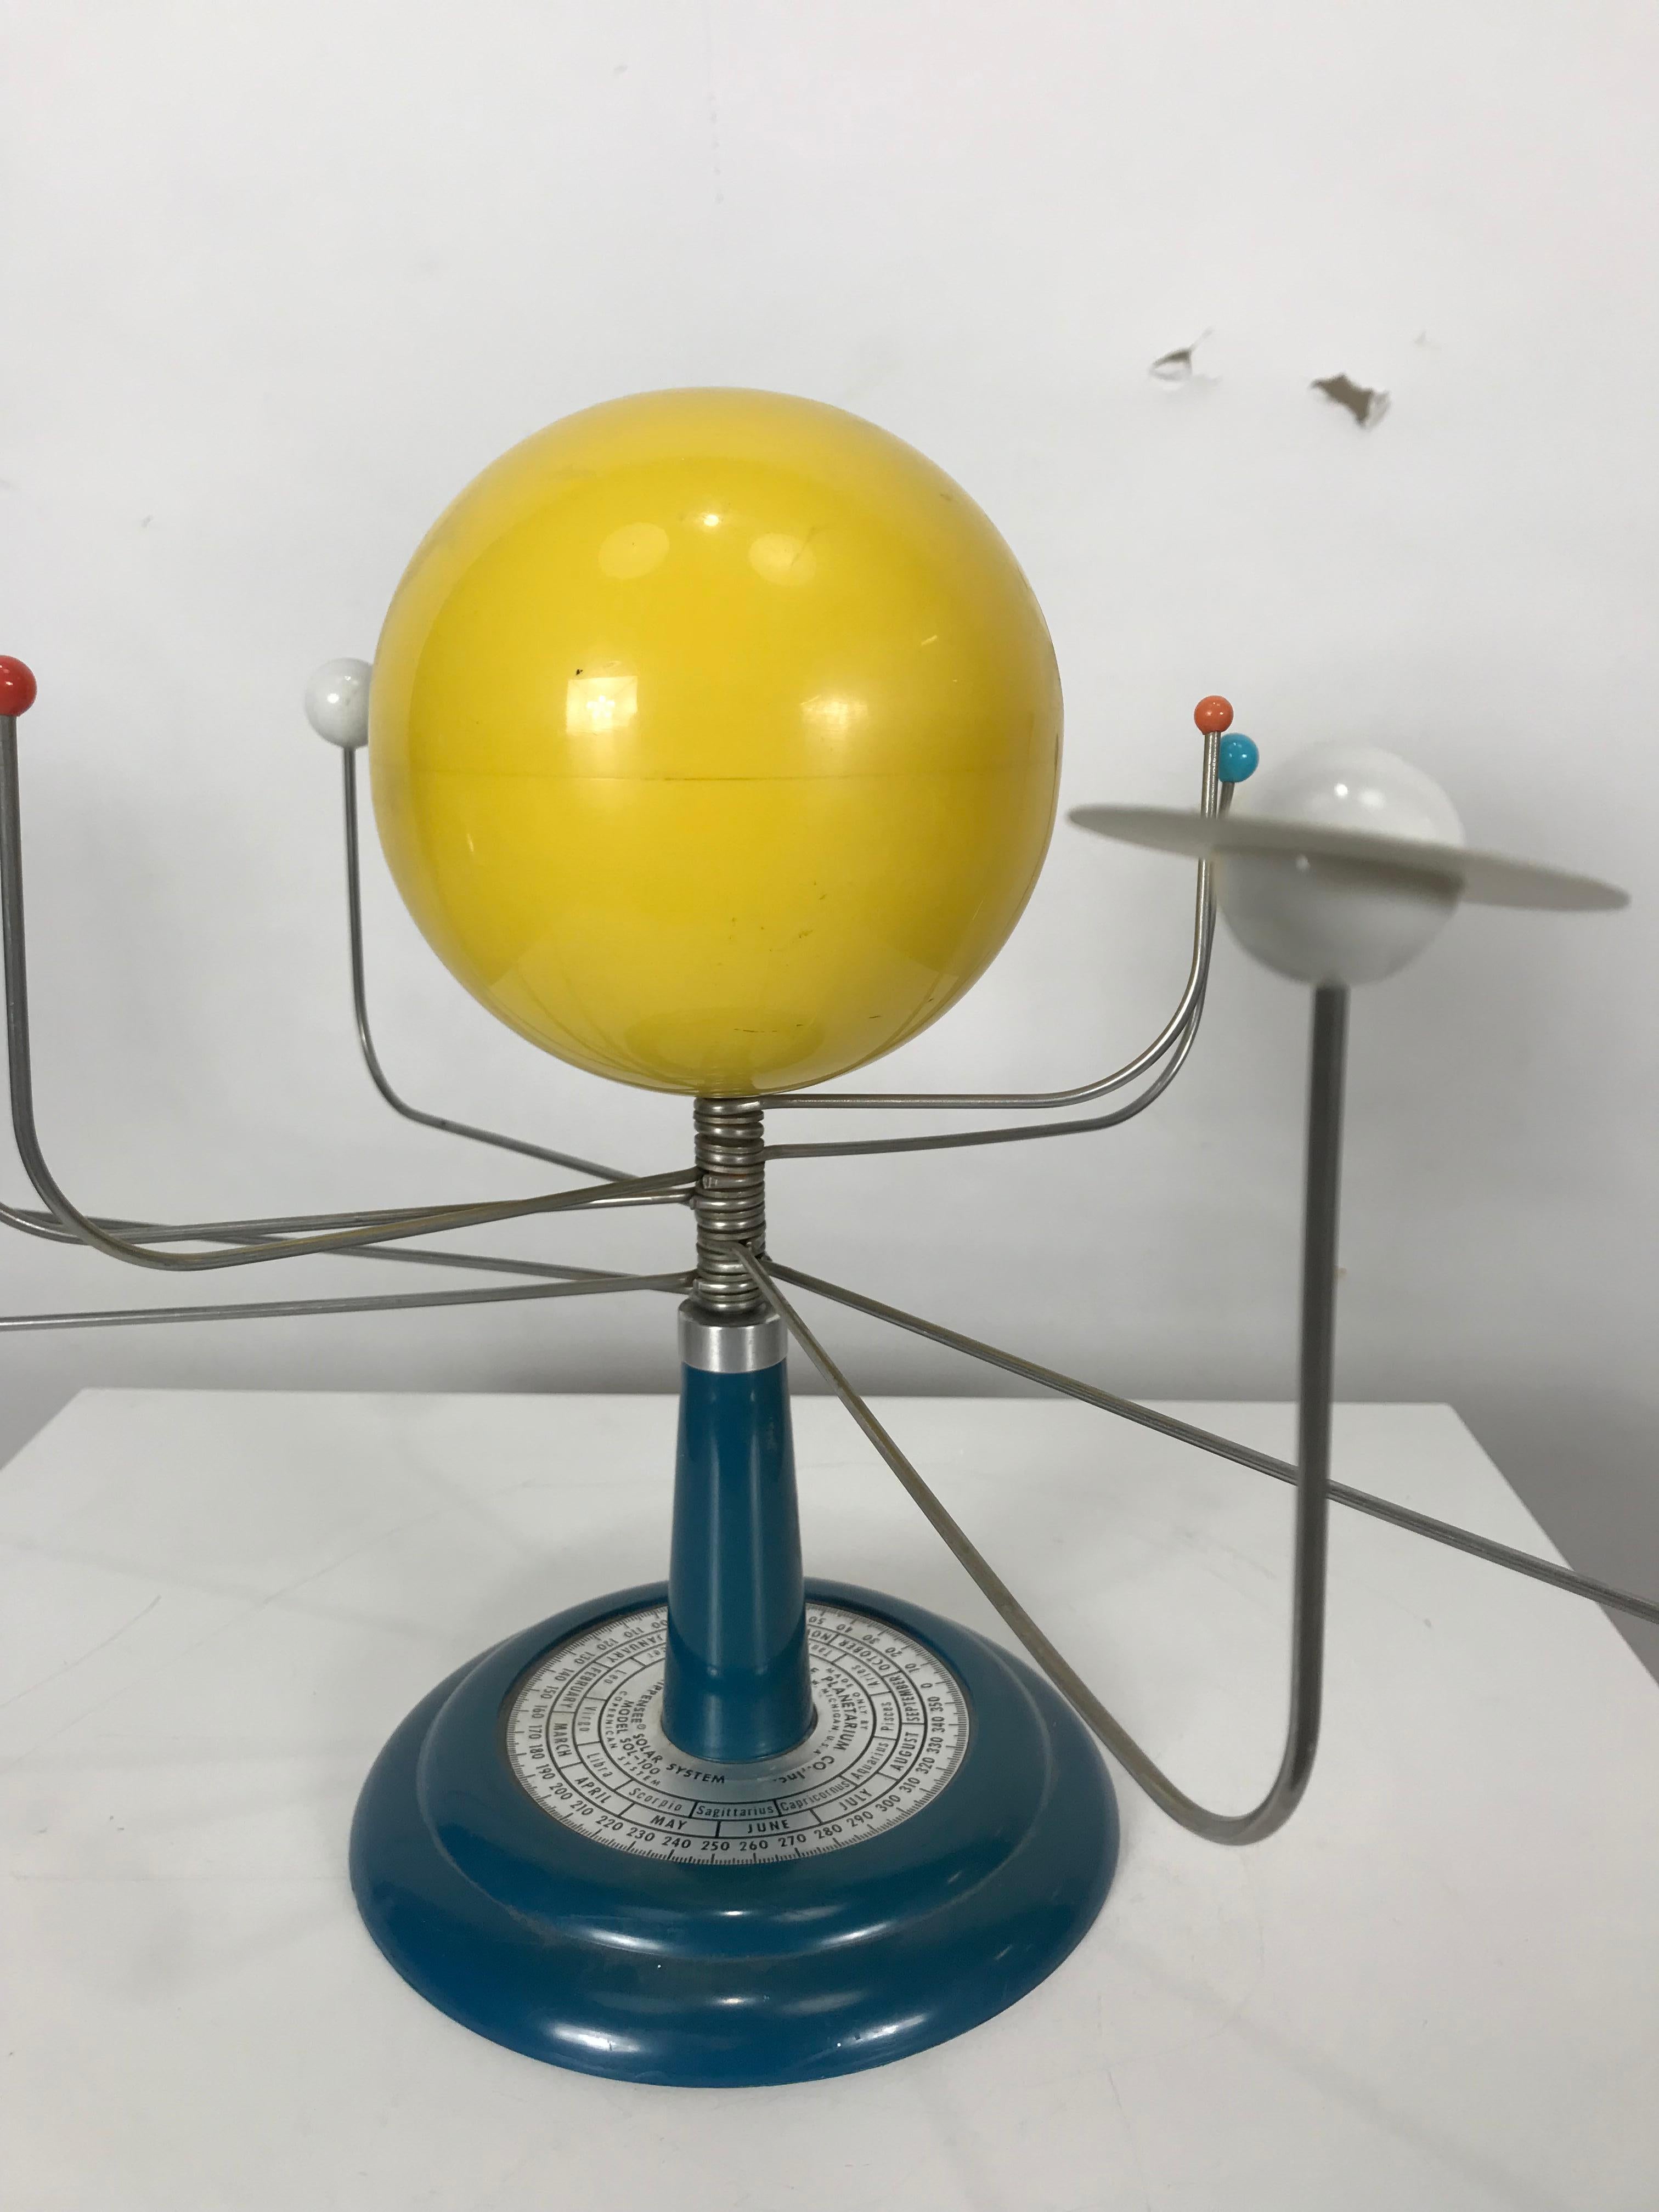 1964 Moderenist Trippensee solar system planetarium, model SOL-100. Amazing midcentury design, early plastic, large sun and 10 planetary colorful bodies.